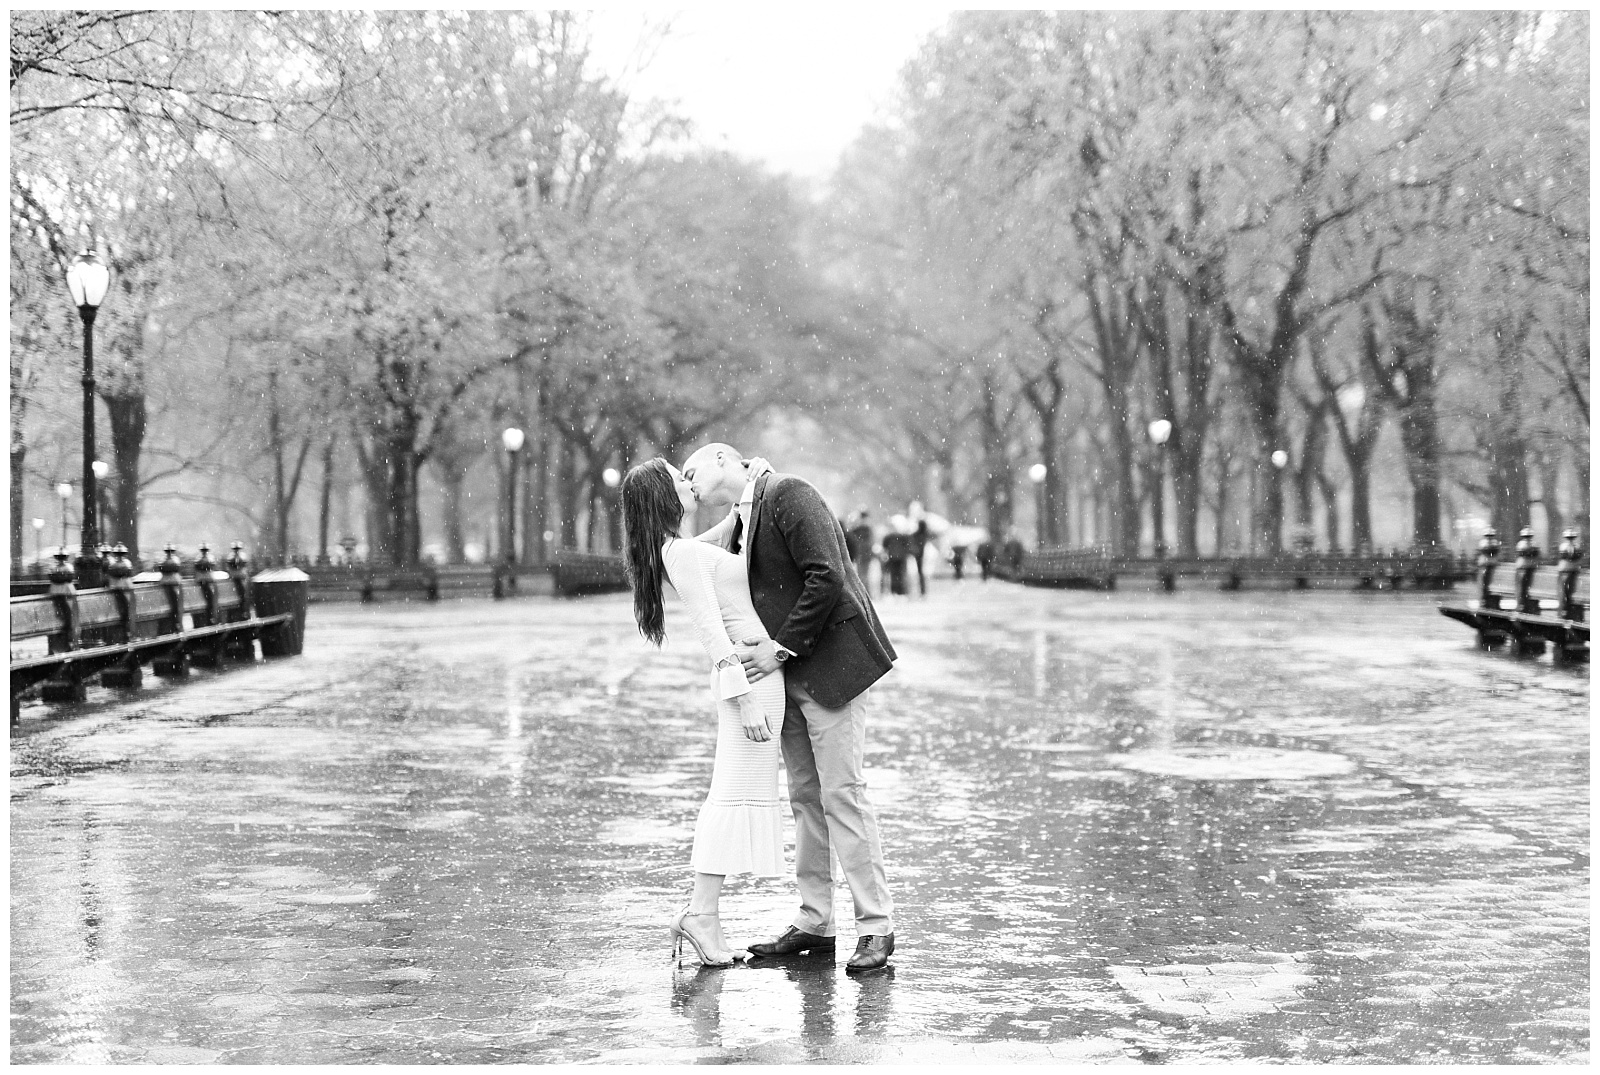 A couple kisses in the rain in the Mall at Central Park in New York City.